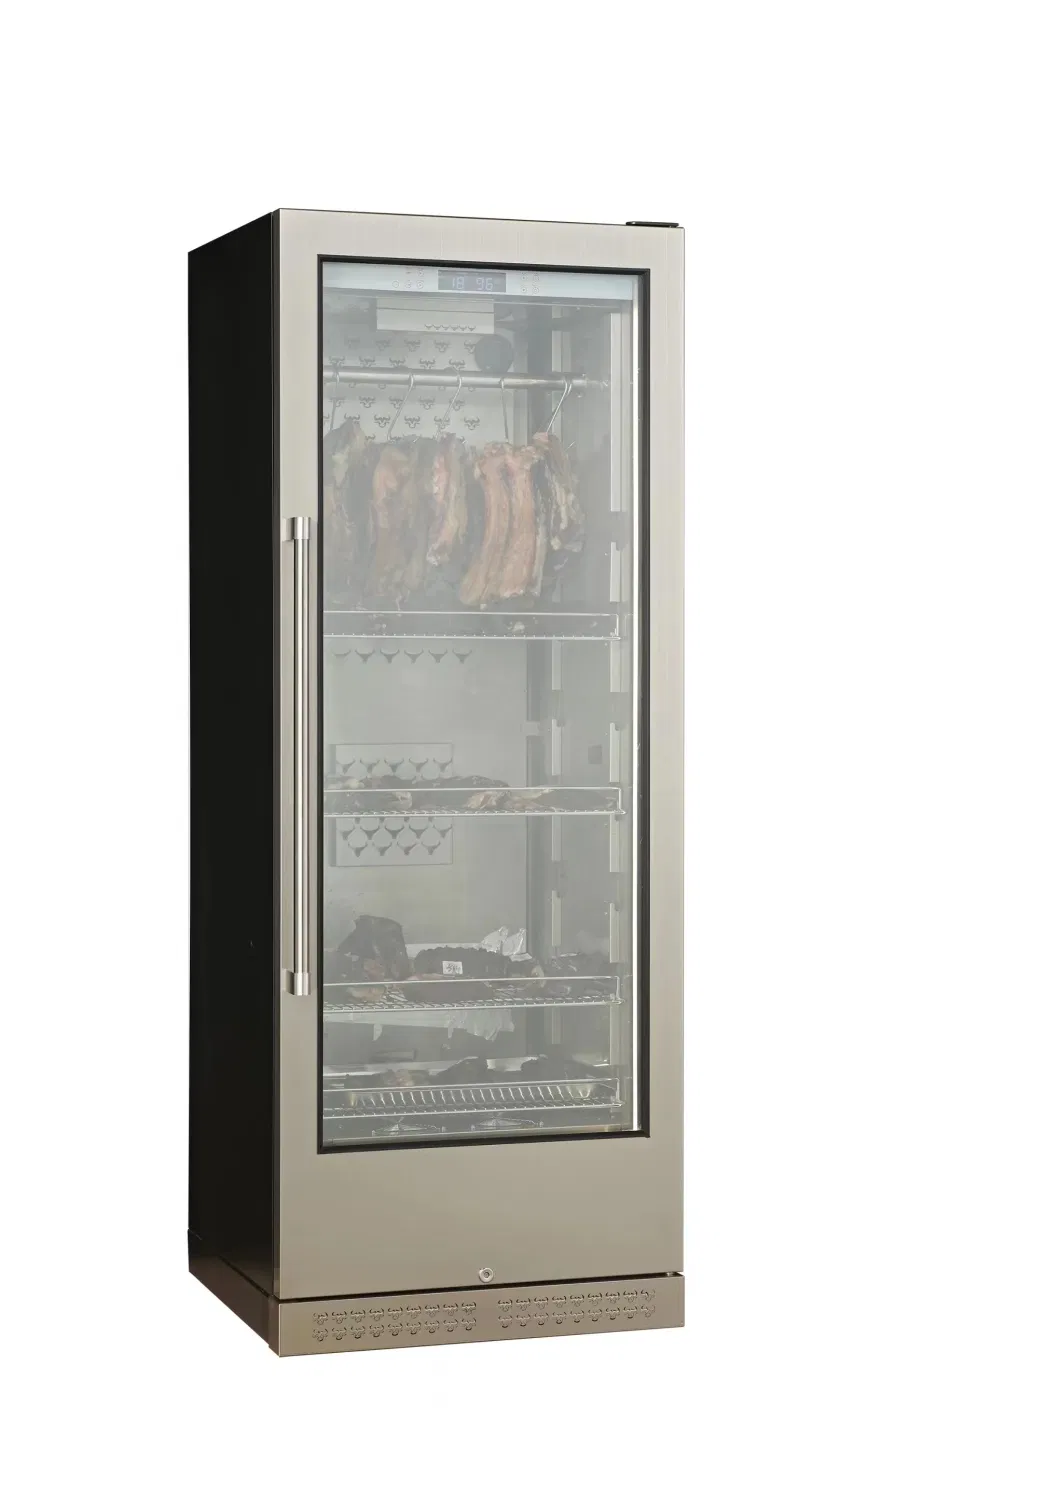 Wholesale Freestanding Aging Refrigerator Meat and Curring Refrige Professional Meat Dry Ager